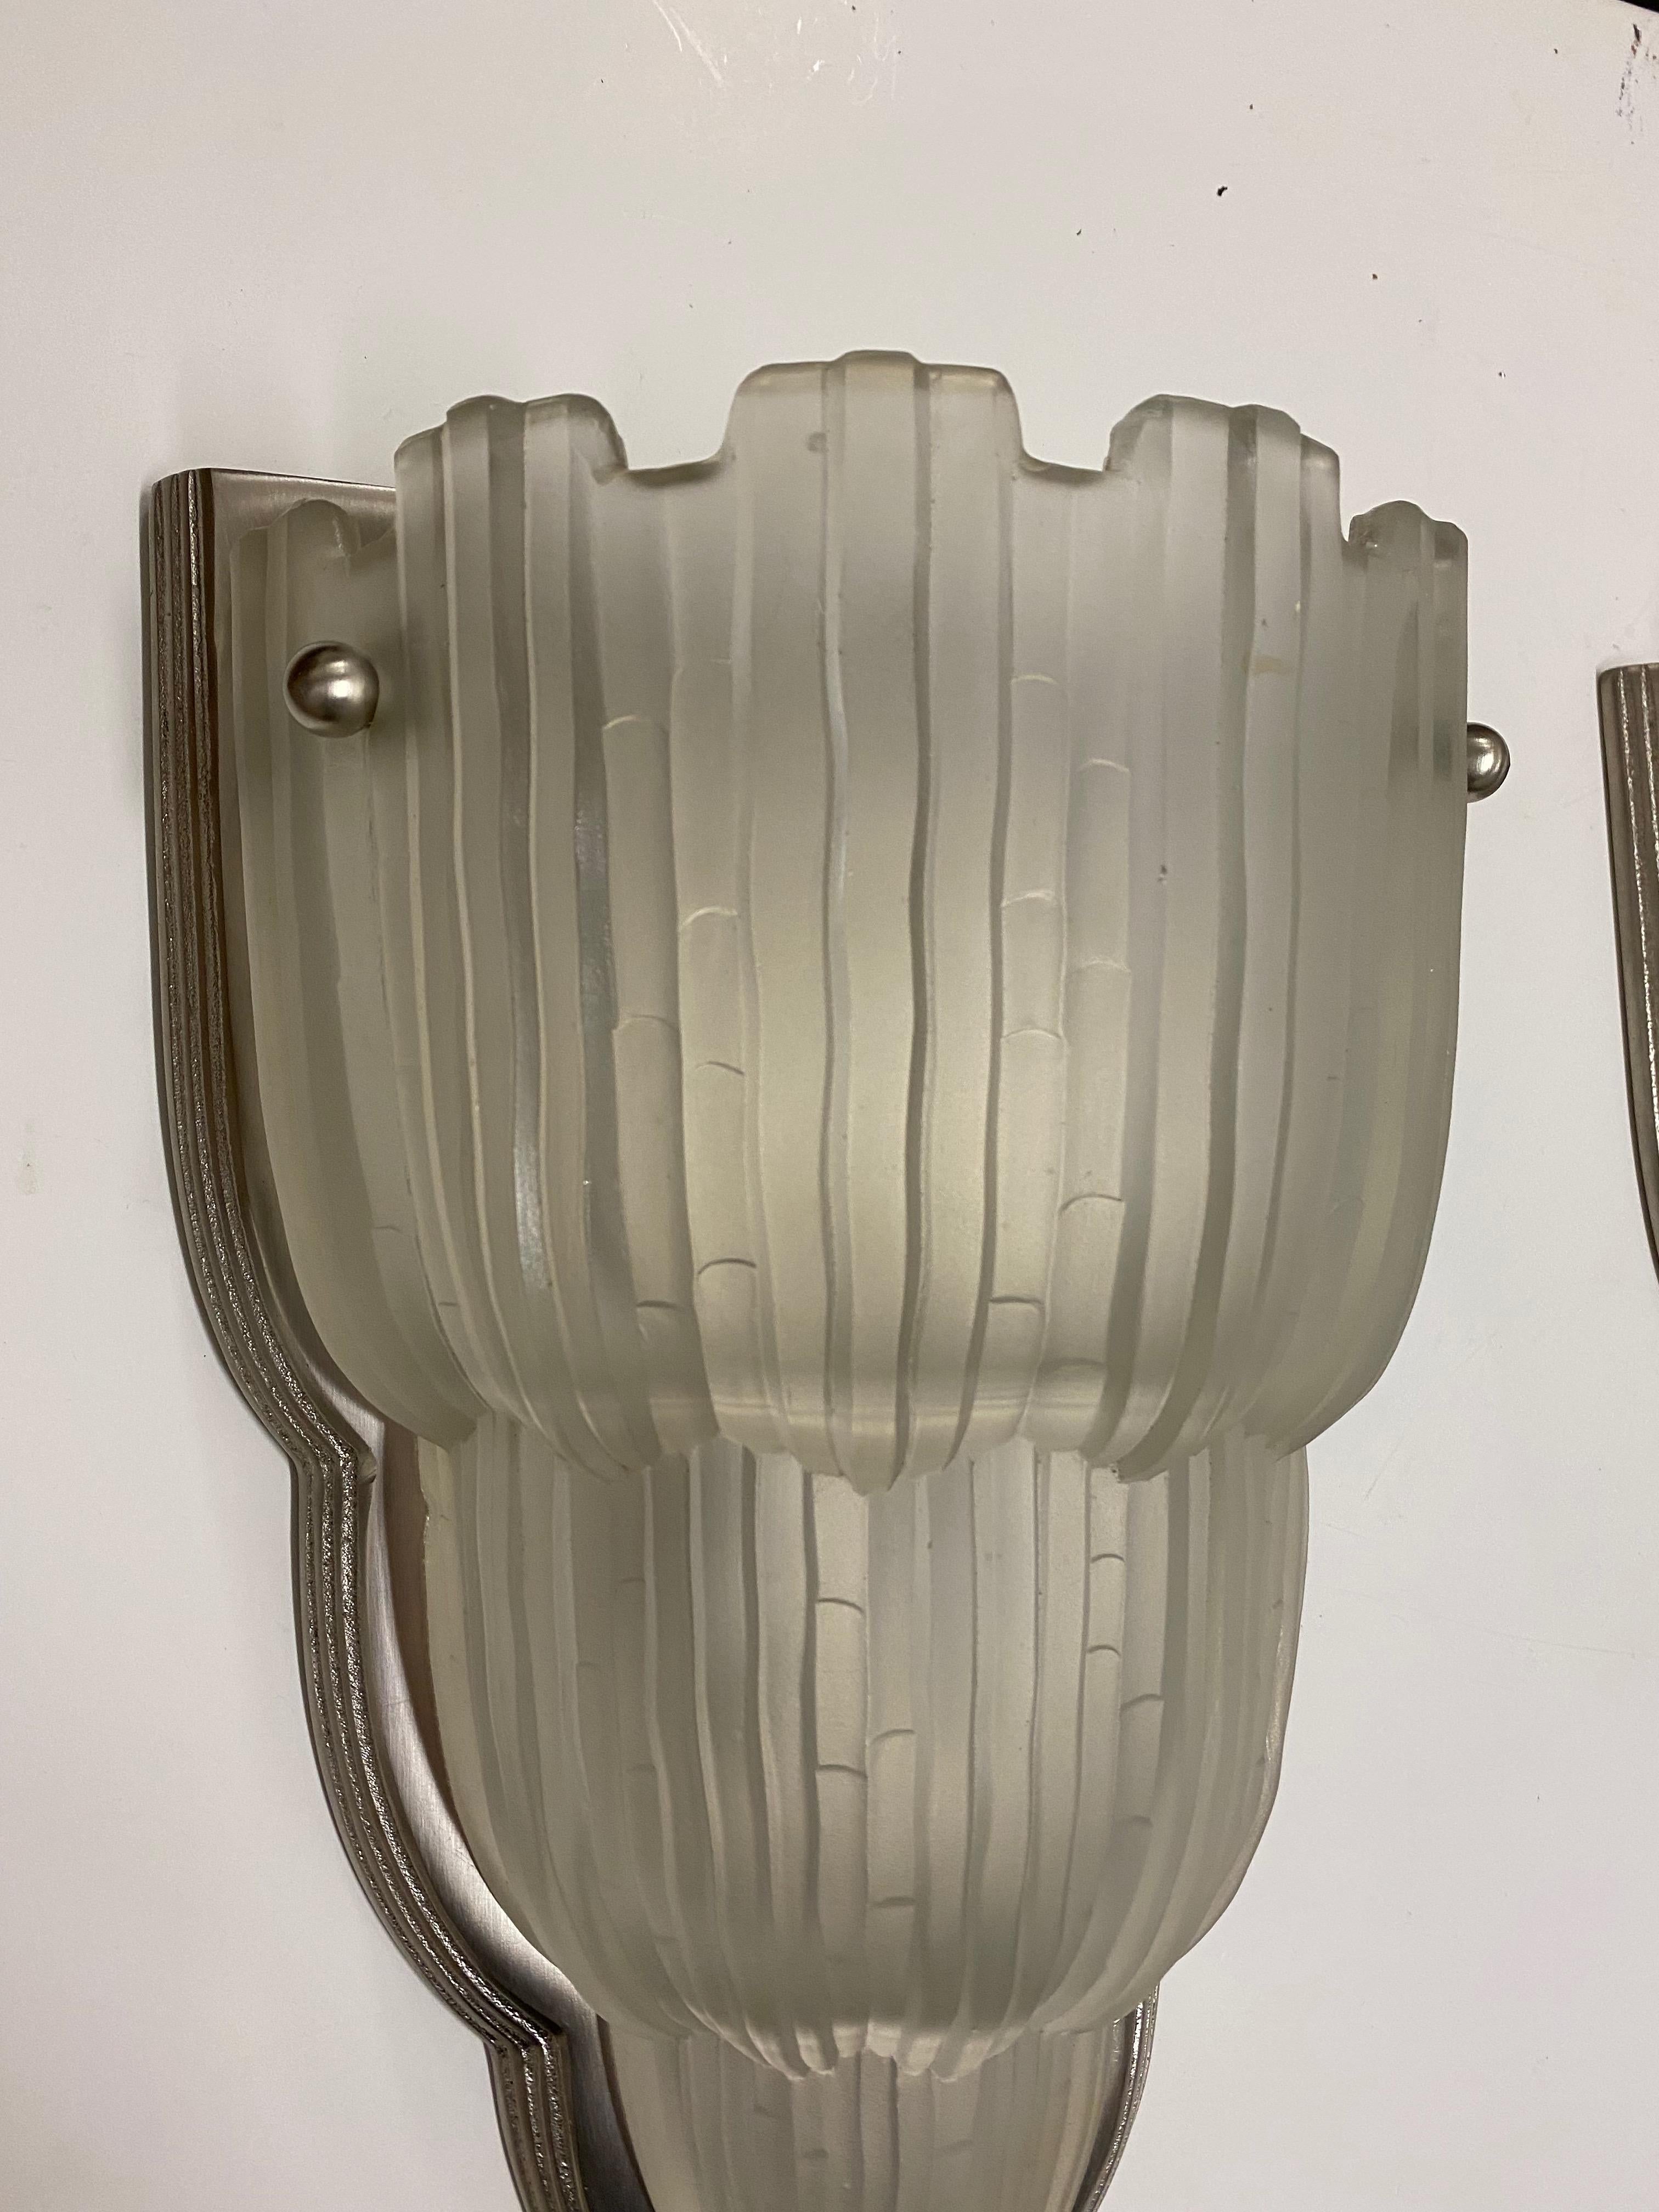 Pair of French Art Deco Wall Sconces Signed by Sabino In Good Condition For Sale In North Bergen, NJ